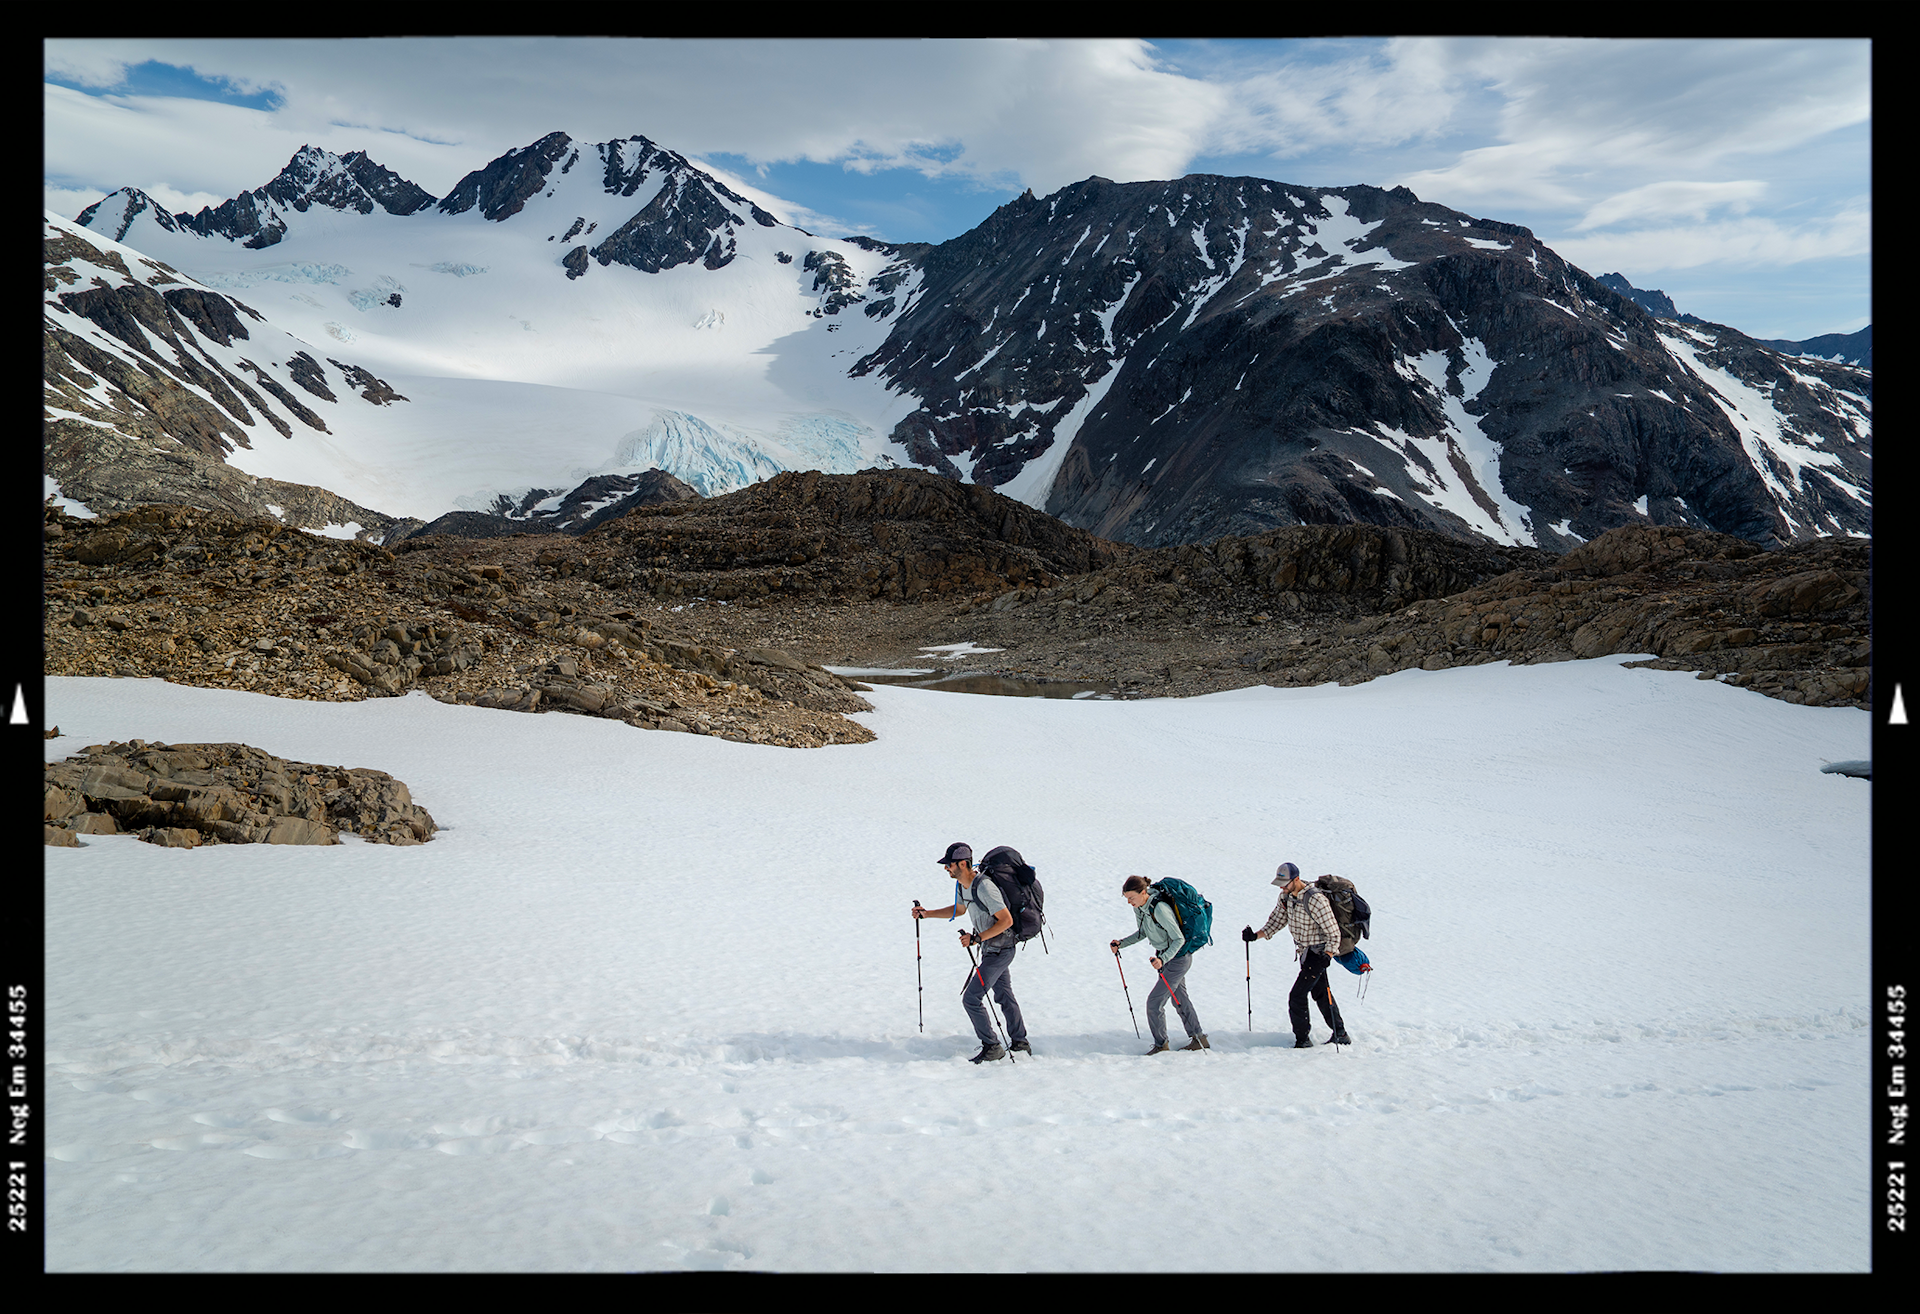 Hikers crossing the snow with hiking poles in Patagonia